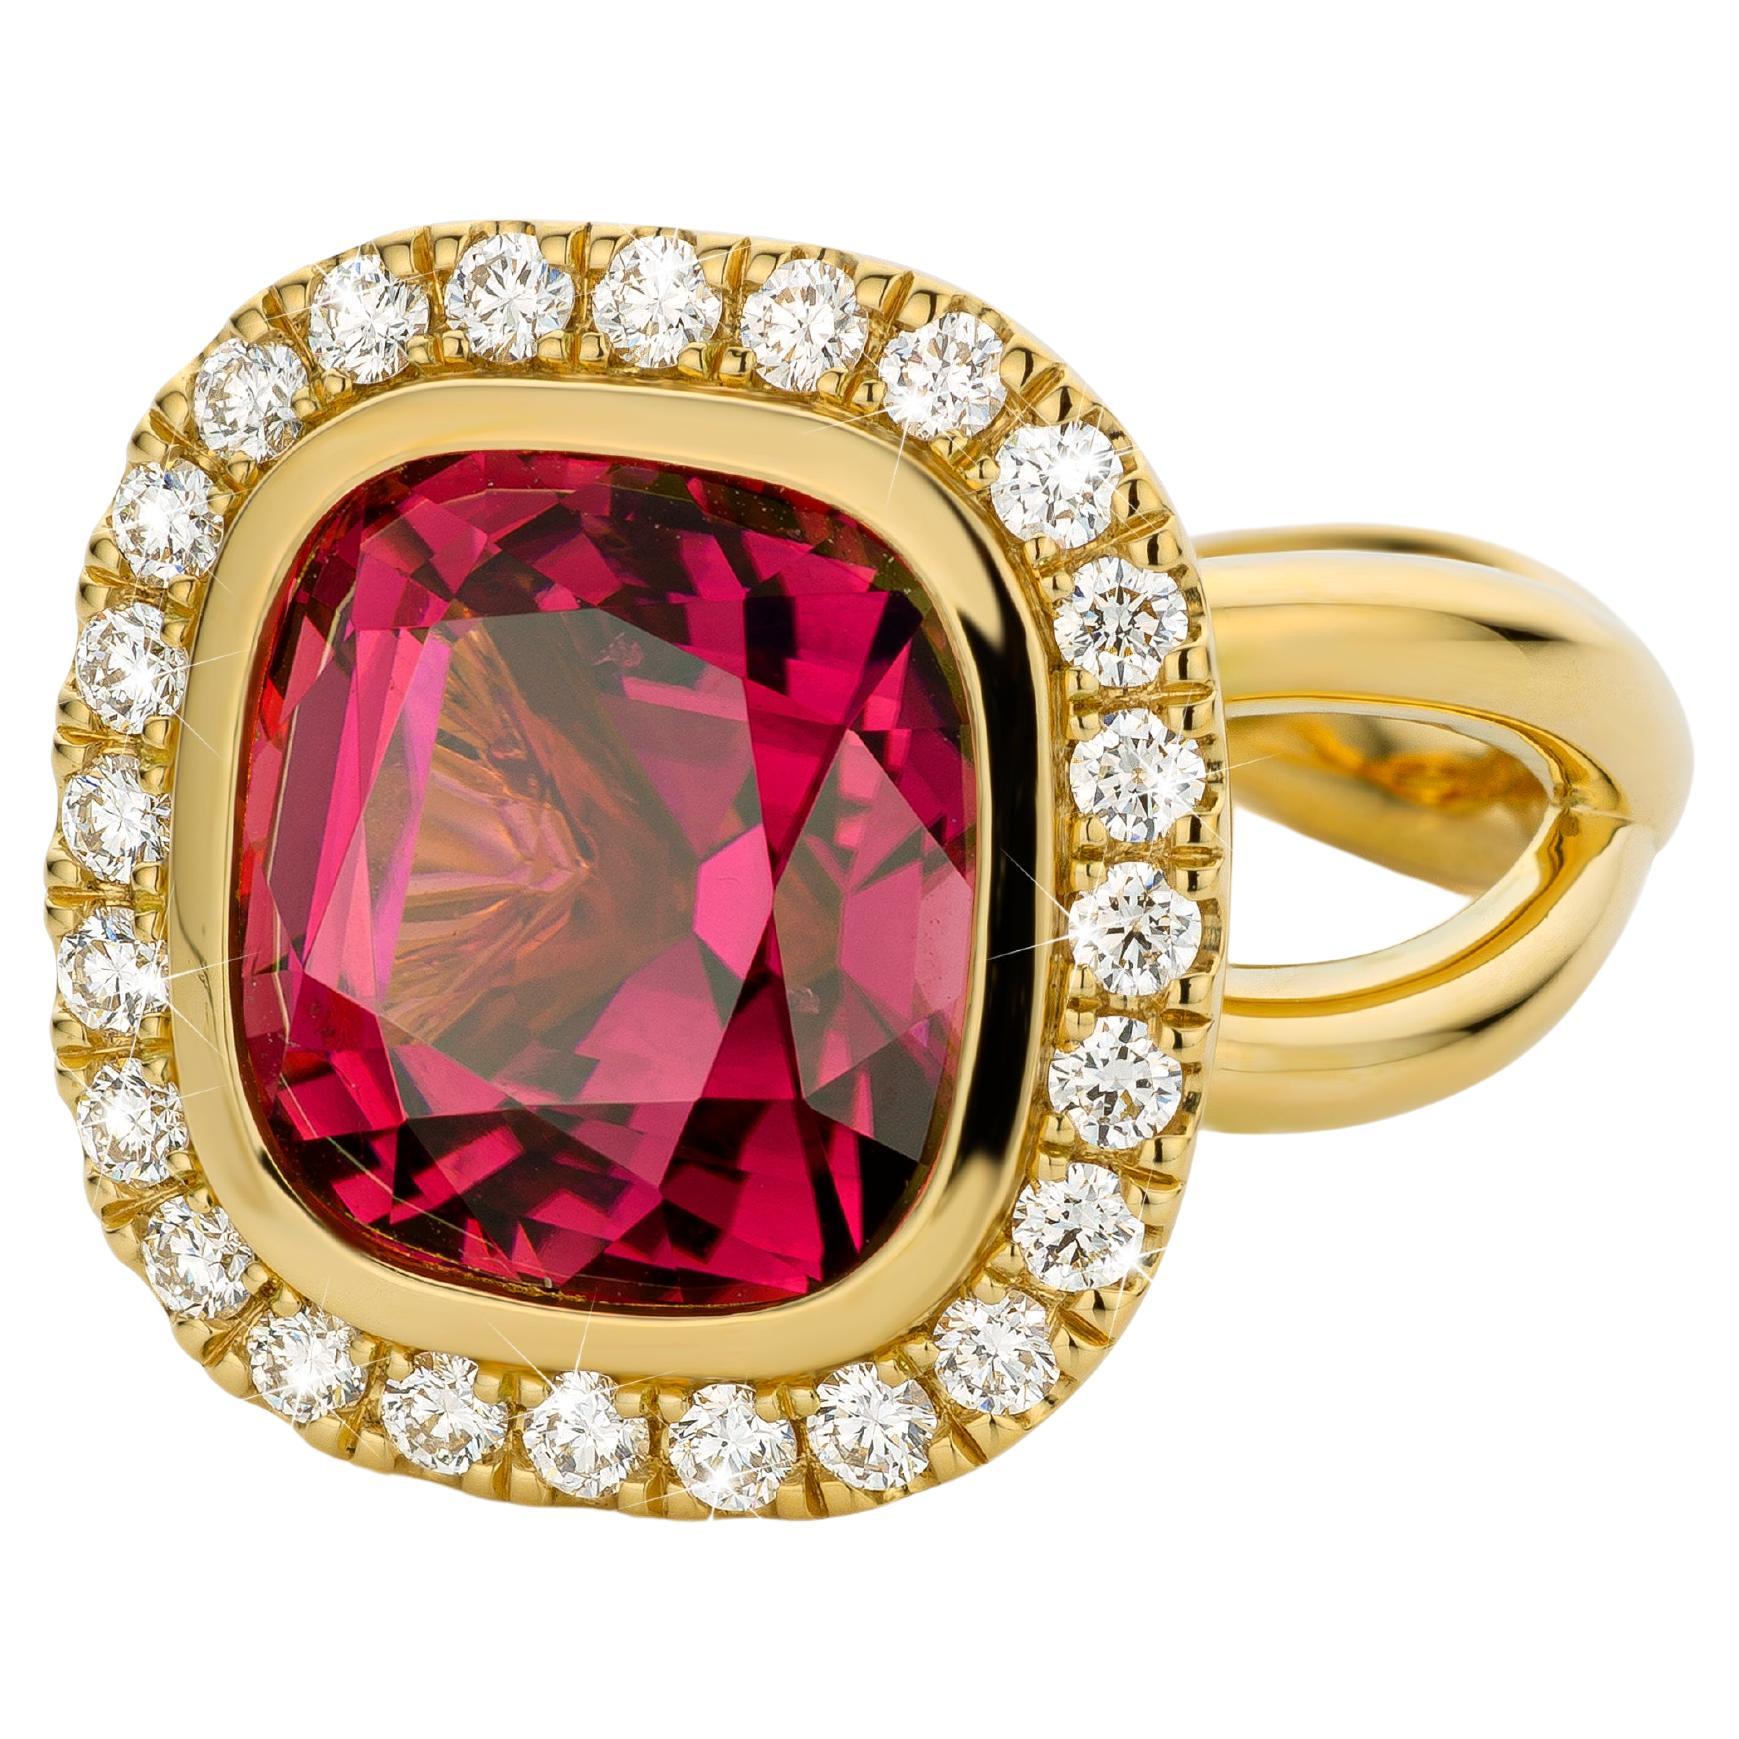 Cober “Playful Pink” with a deep pink Tourmaline and 24 Diamonds YellowGold Ring For Sale